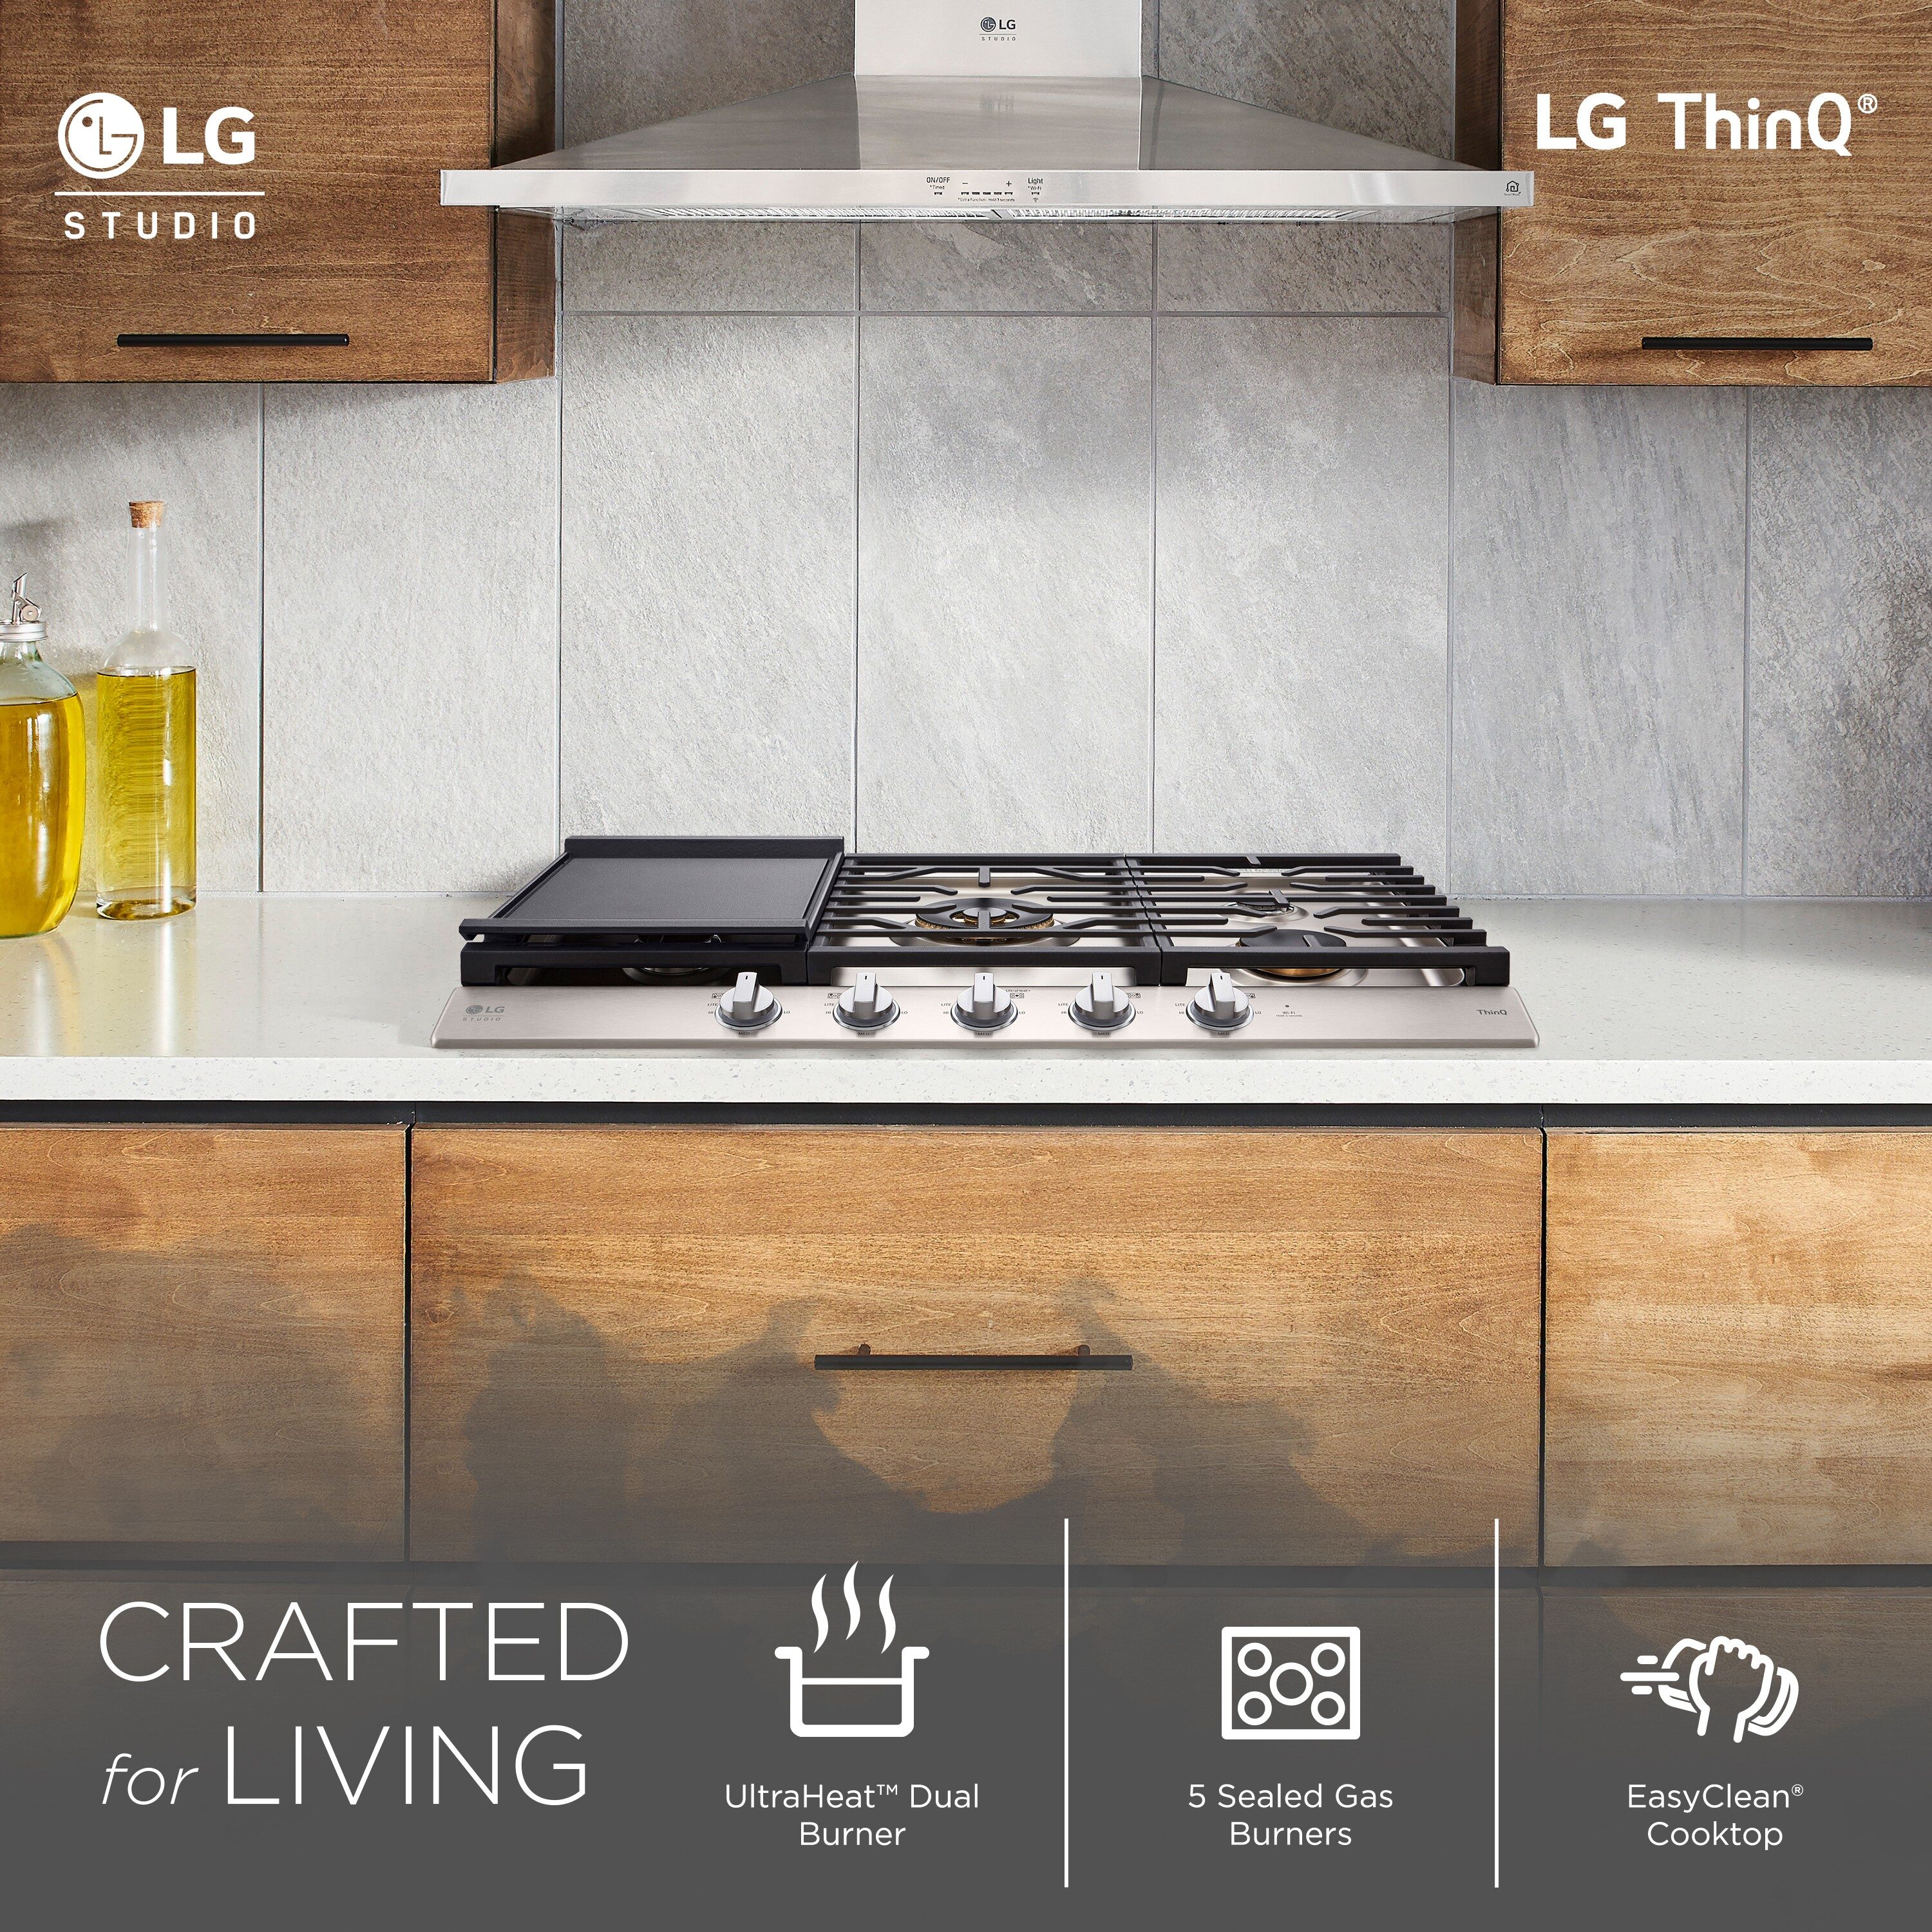 CBGS3628S in by LG in Worcester, MA - LG STUDIO 36 UltraHeat™ Gas Cooktop  with EasyClean®